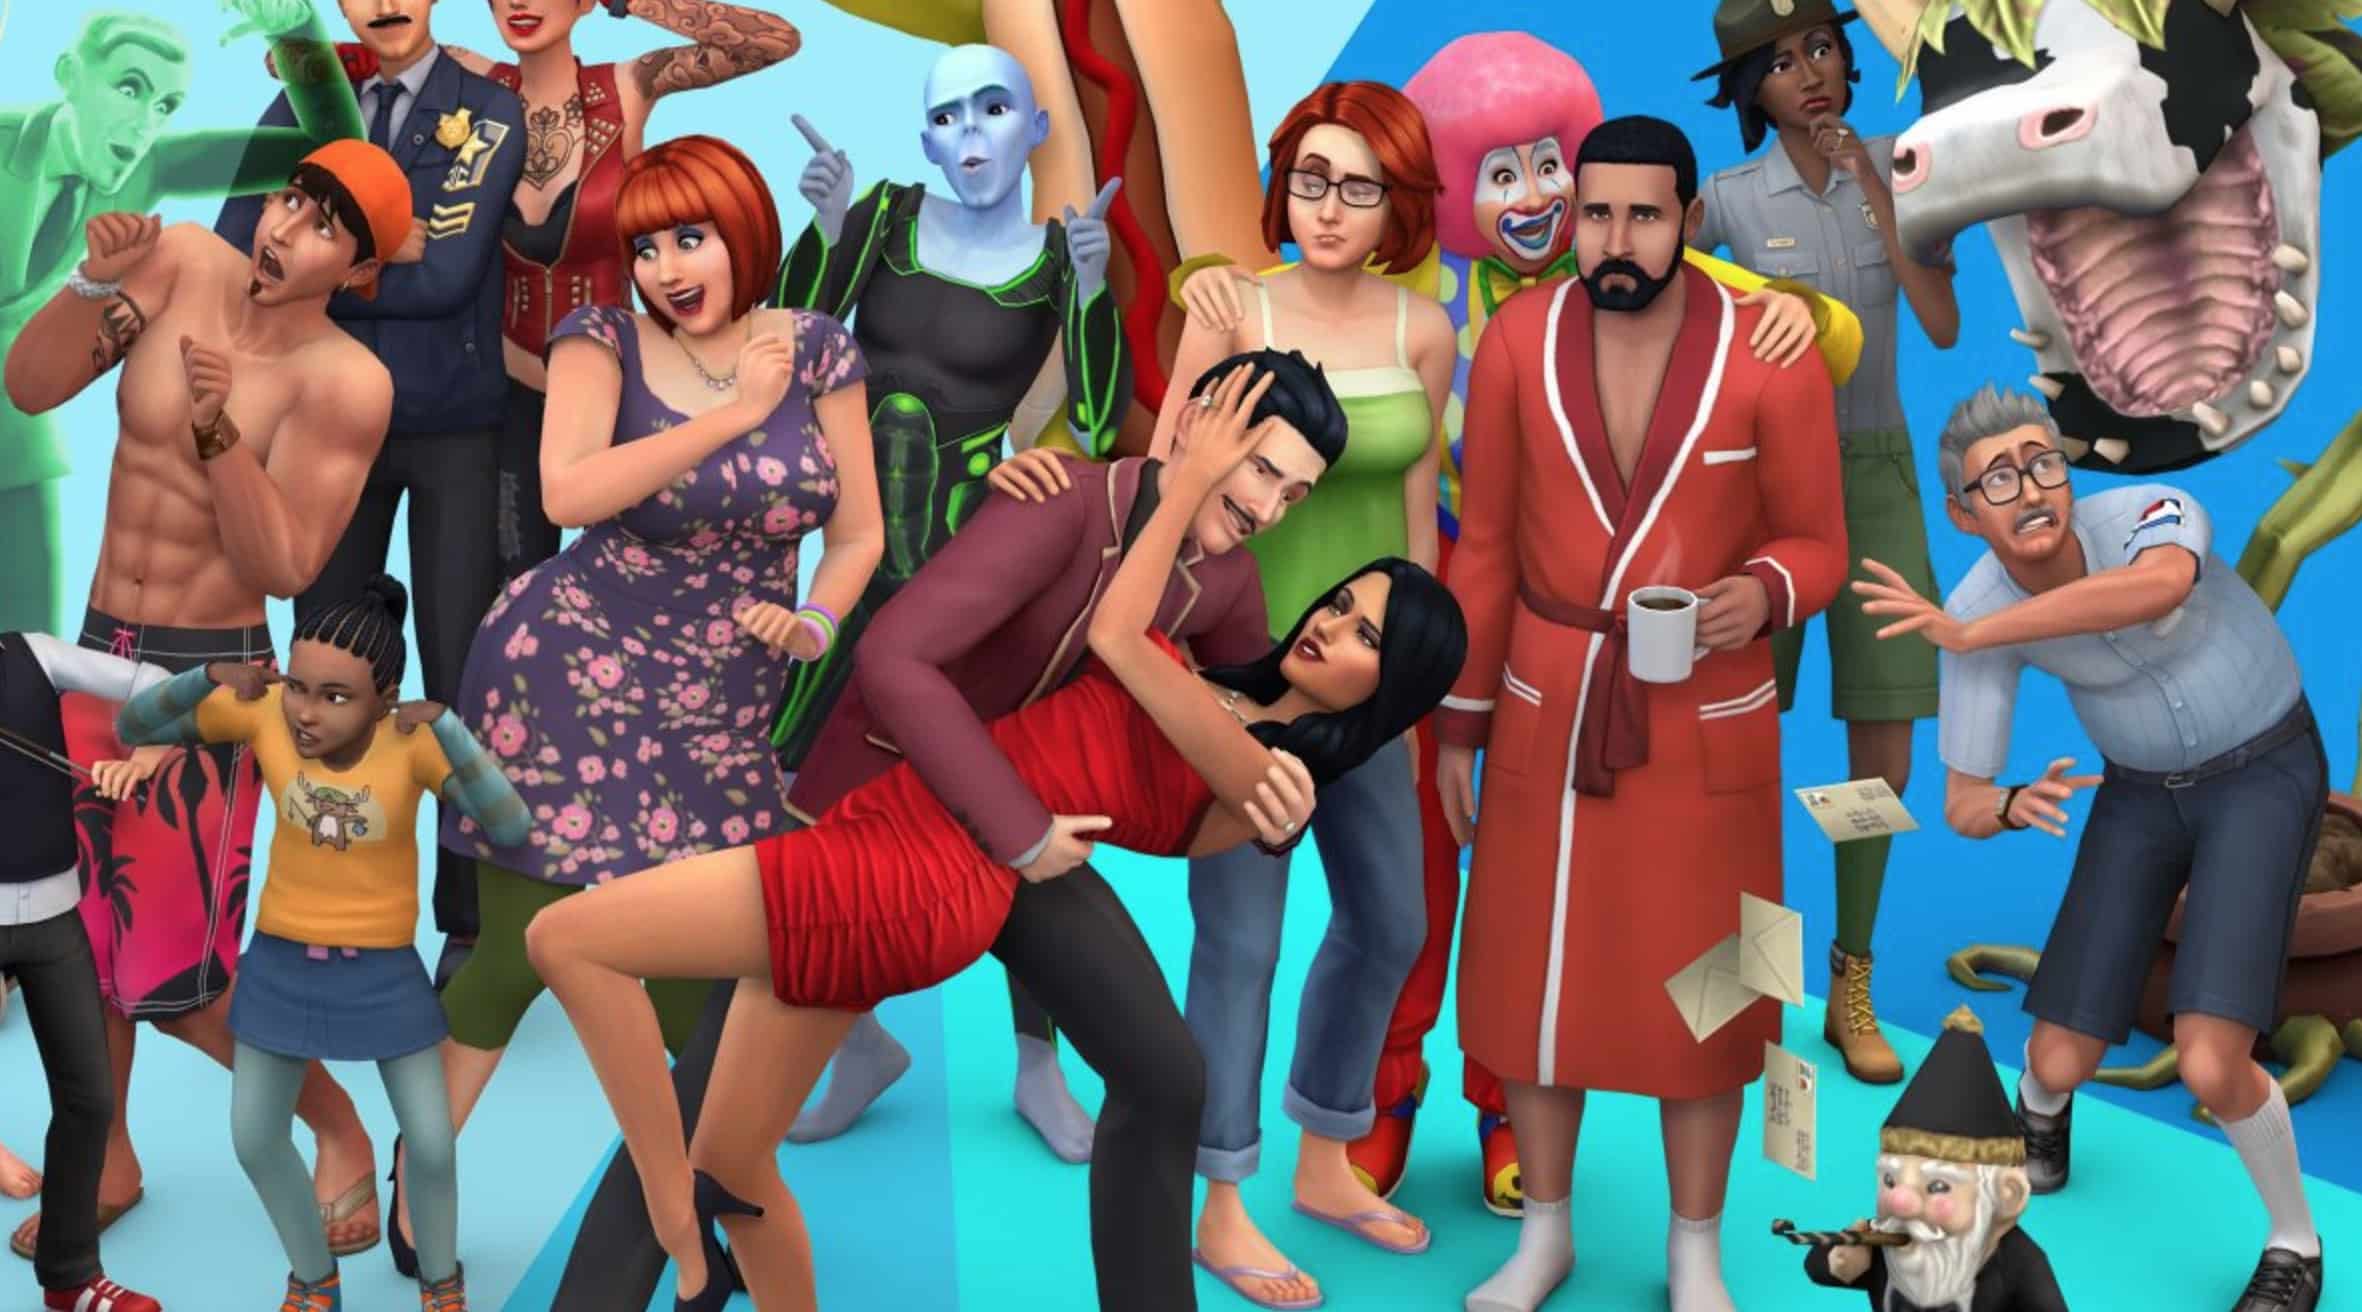 The Sims 4 Goes Free On Xbox This October, With A Bonus For Game Pass  Members